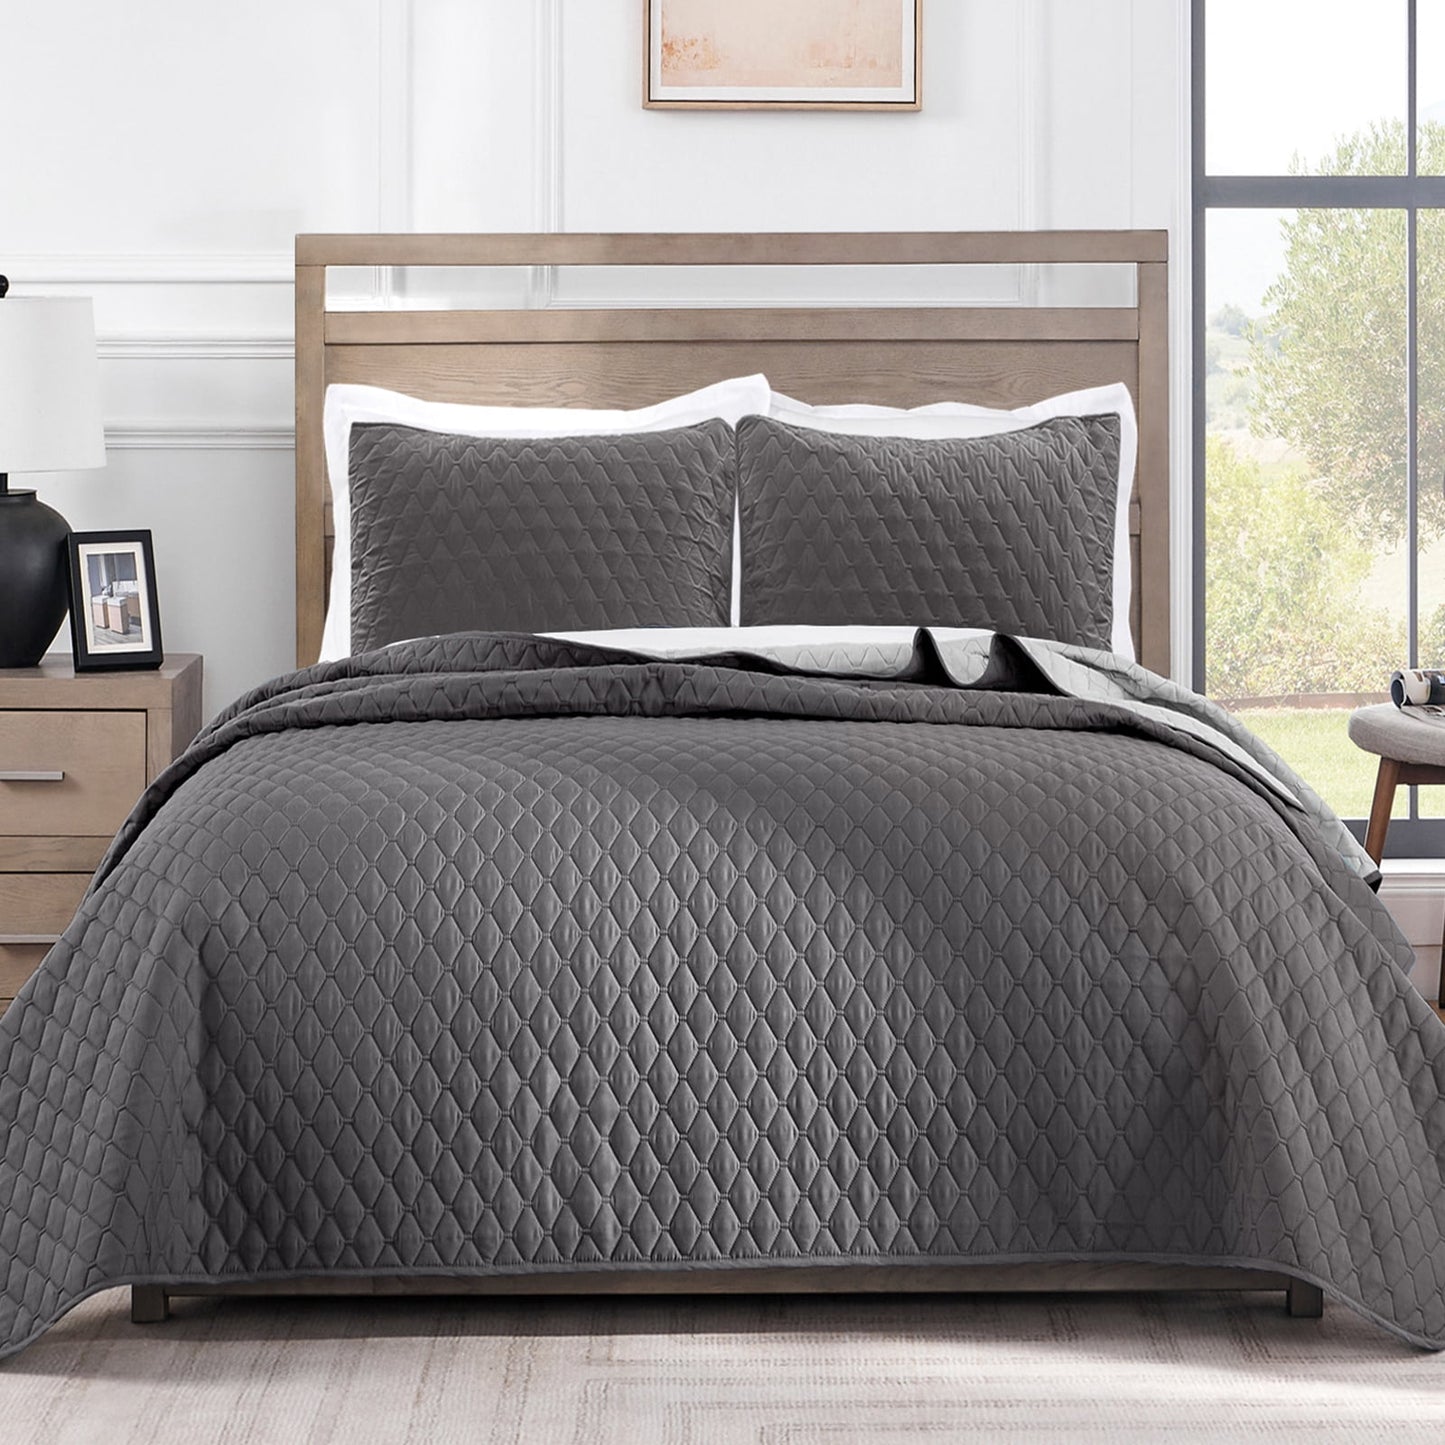 Exclusivo Mezcla Ultrasonic Reversible Twin Quilt Bedding Set with Pillow Sham, Lightweight Quilts Twin Size, Soft Bedspreads Bed Coverlets for All Seasons - (Grey, 68"x88")